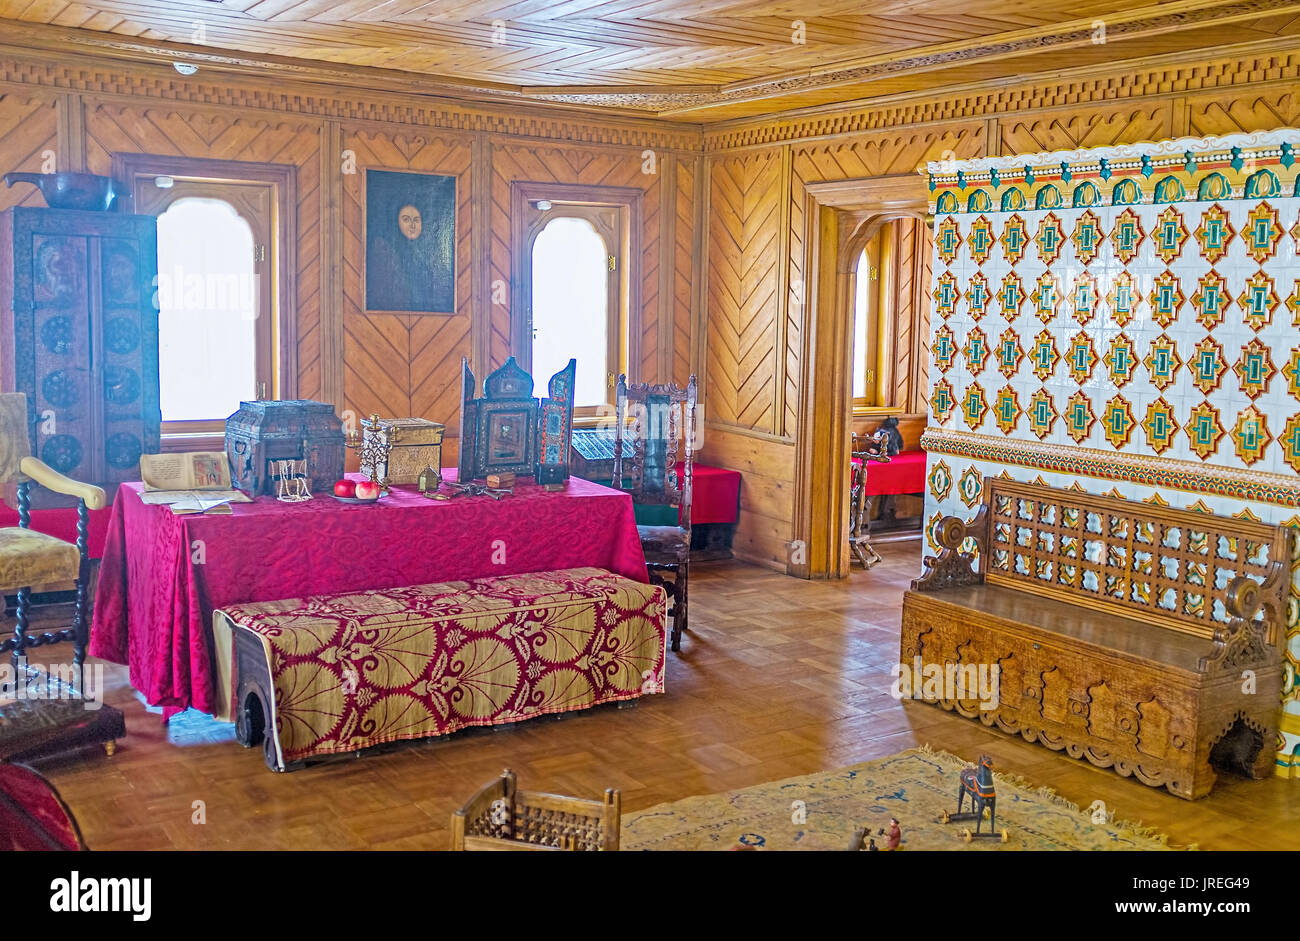 MOSCOW, RUSSIA - MAY 11, 2015: Palace of Romanov Boyar boasts big Ladies Chamber with huge richly decorated stove, on May 11 in Moscow Stock Photo